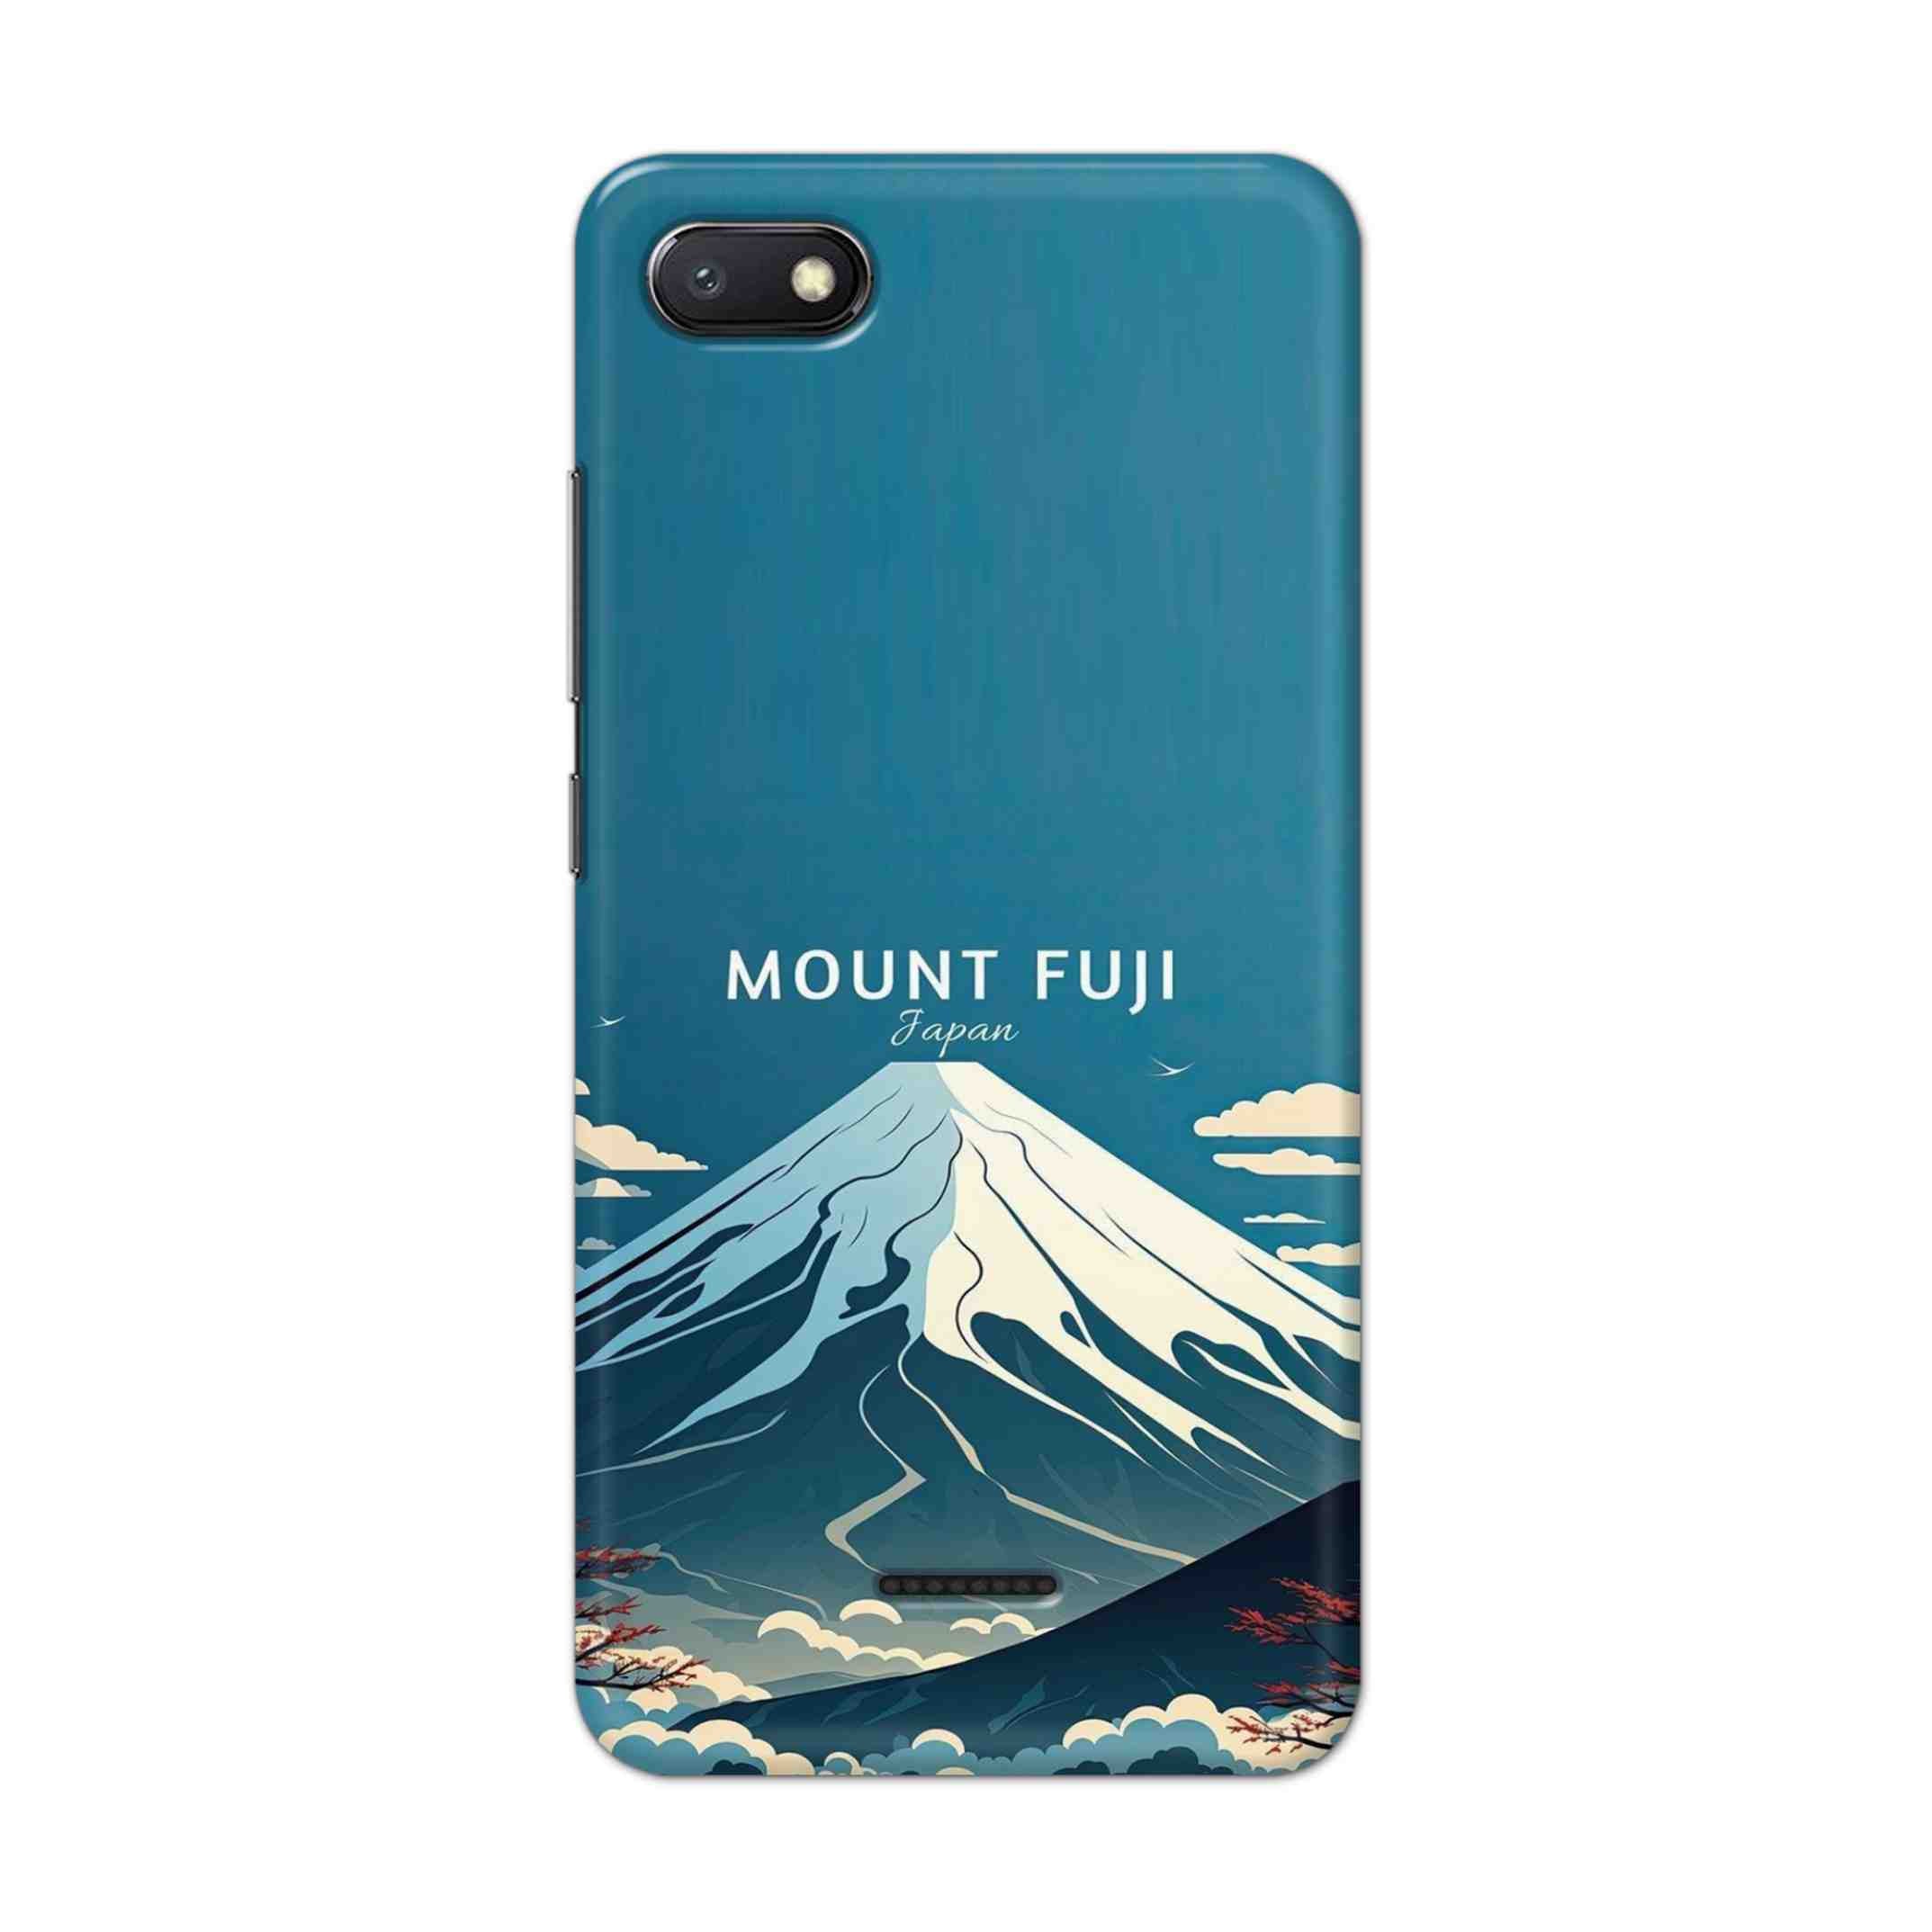 Buy Mount Fuji Hard Back Mobile Phone Case/Cover For Xiaomi Redmi 6A Online